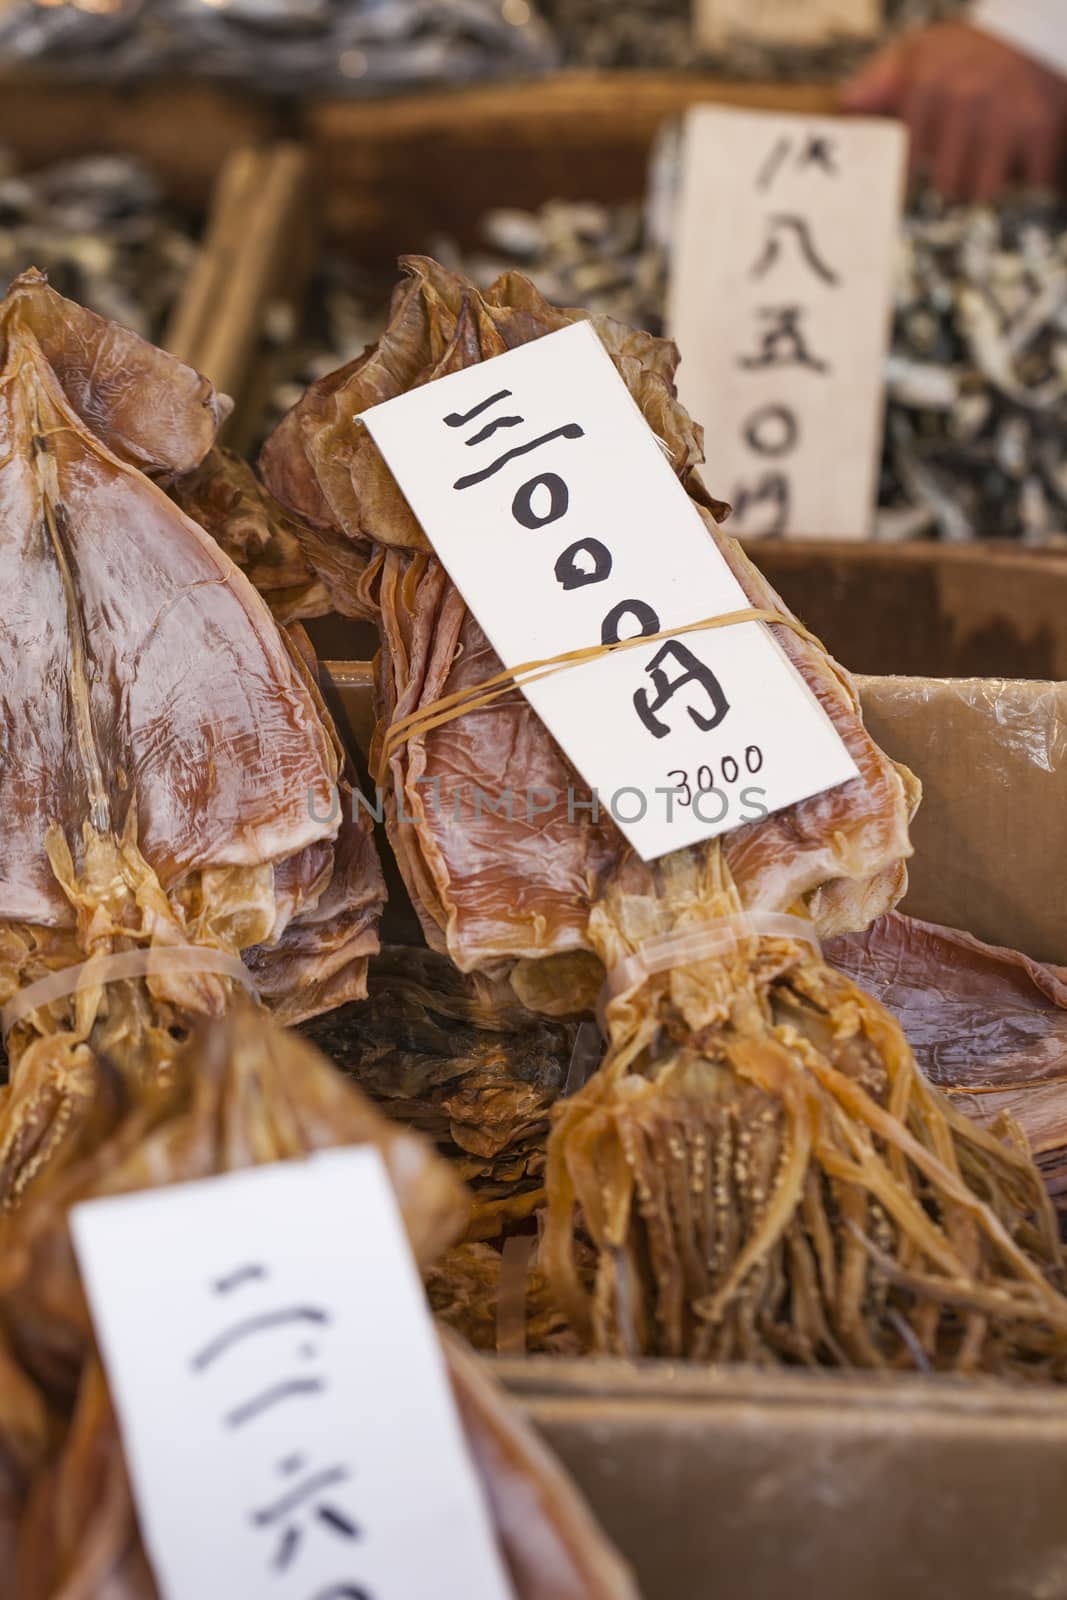 Dried fish, seafood product at market from Japan.

